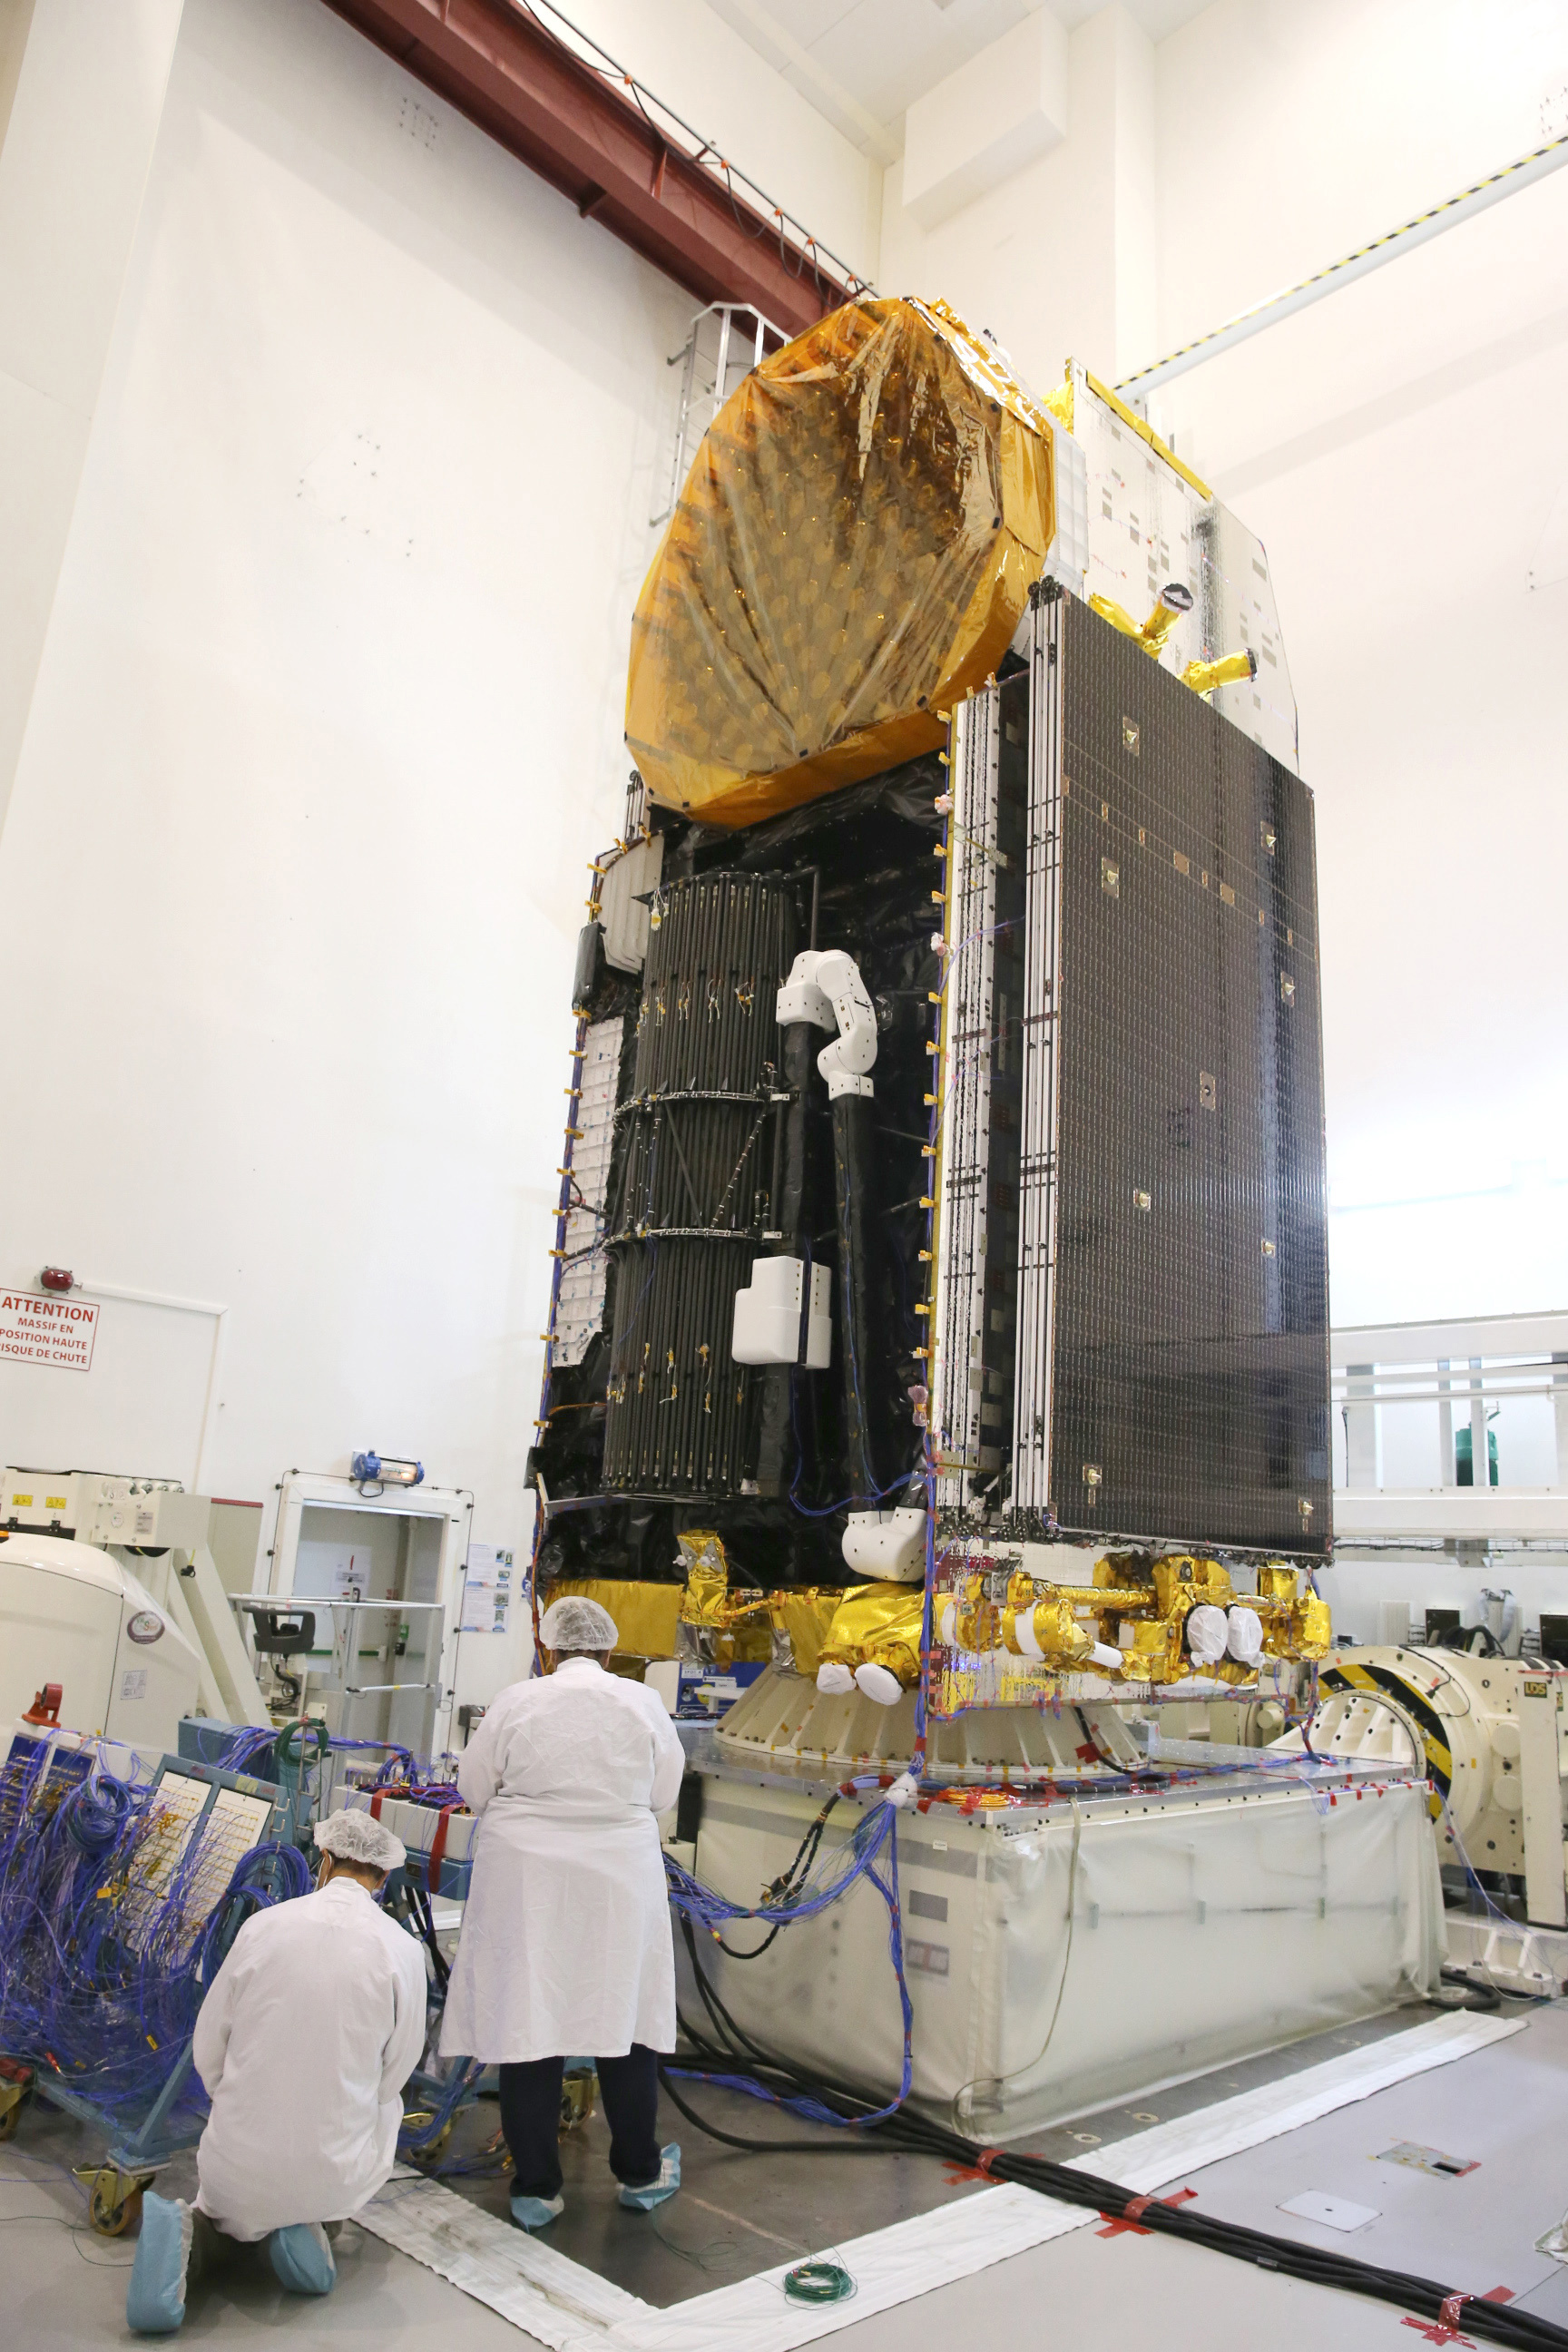 Inmarsat's first I-6 series satellite, F1, is currently undergoing testing in Toulouse, France ahead of a 2021 launch. Credit: Inmarsat/Airbus Defence and Space